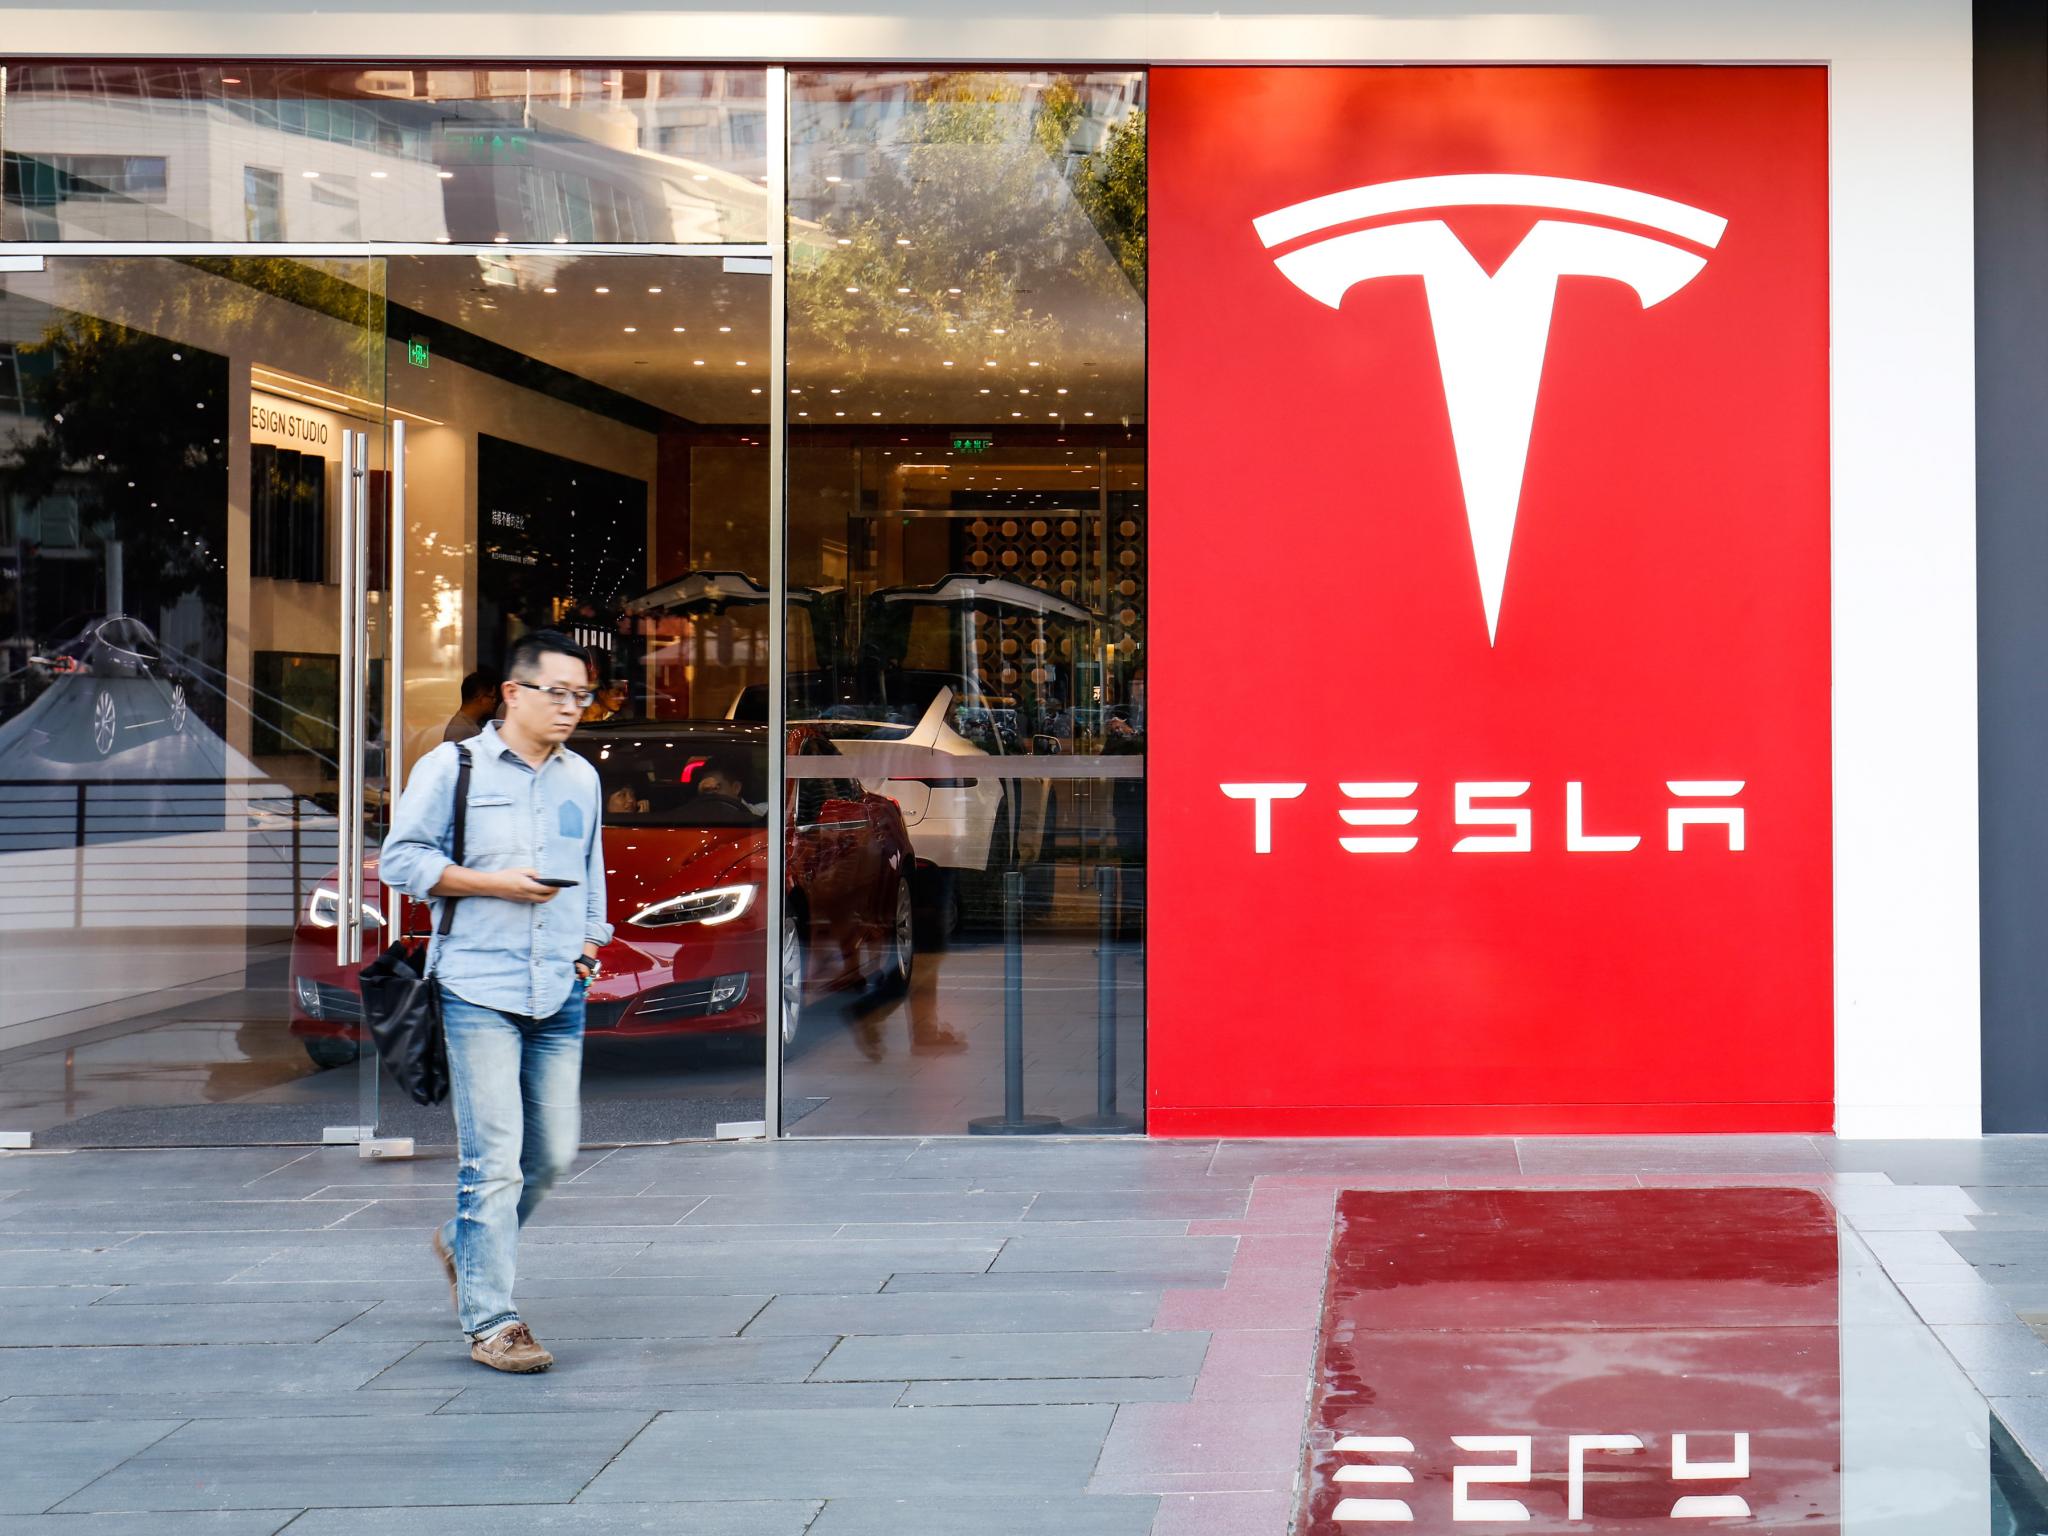  tesla-quickens-model-3-model-y-deliveries-again-in-china-heres-the-new-wait-period 